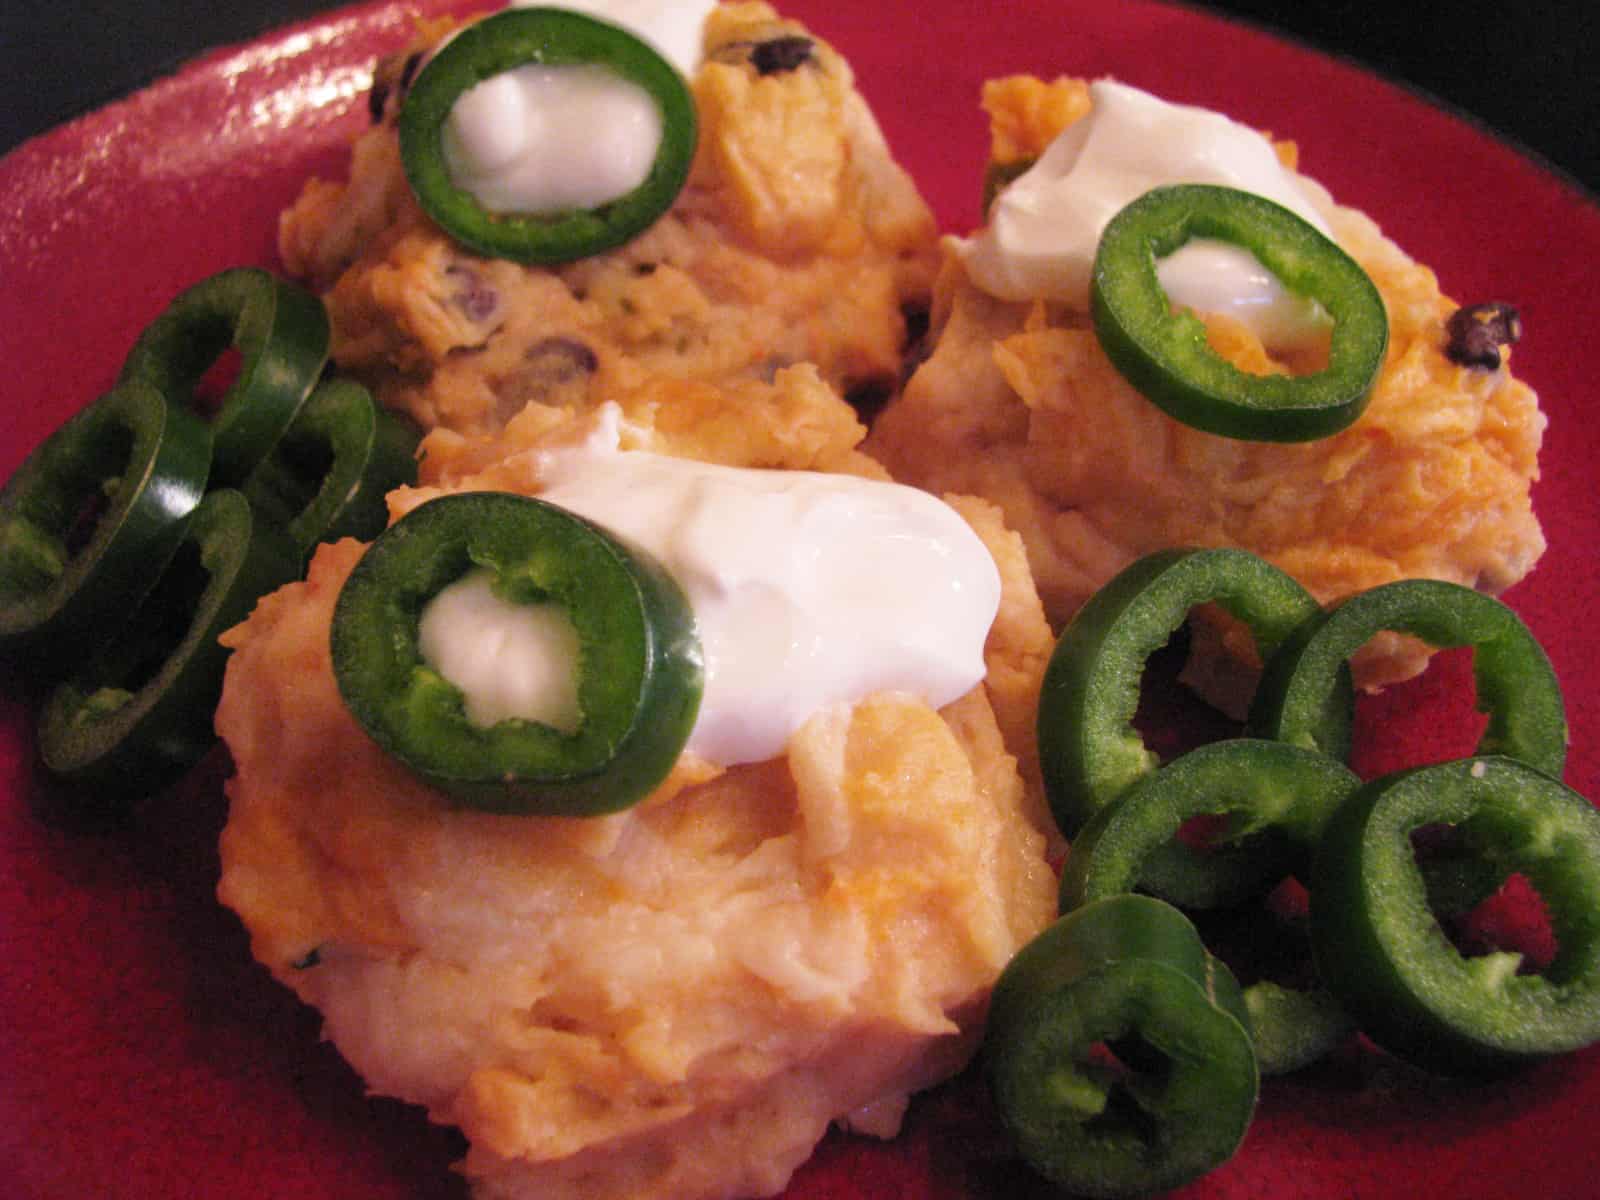 Muffin Tin Baked Tex-Mex Mashed Potatoes